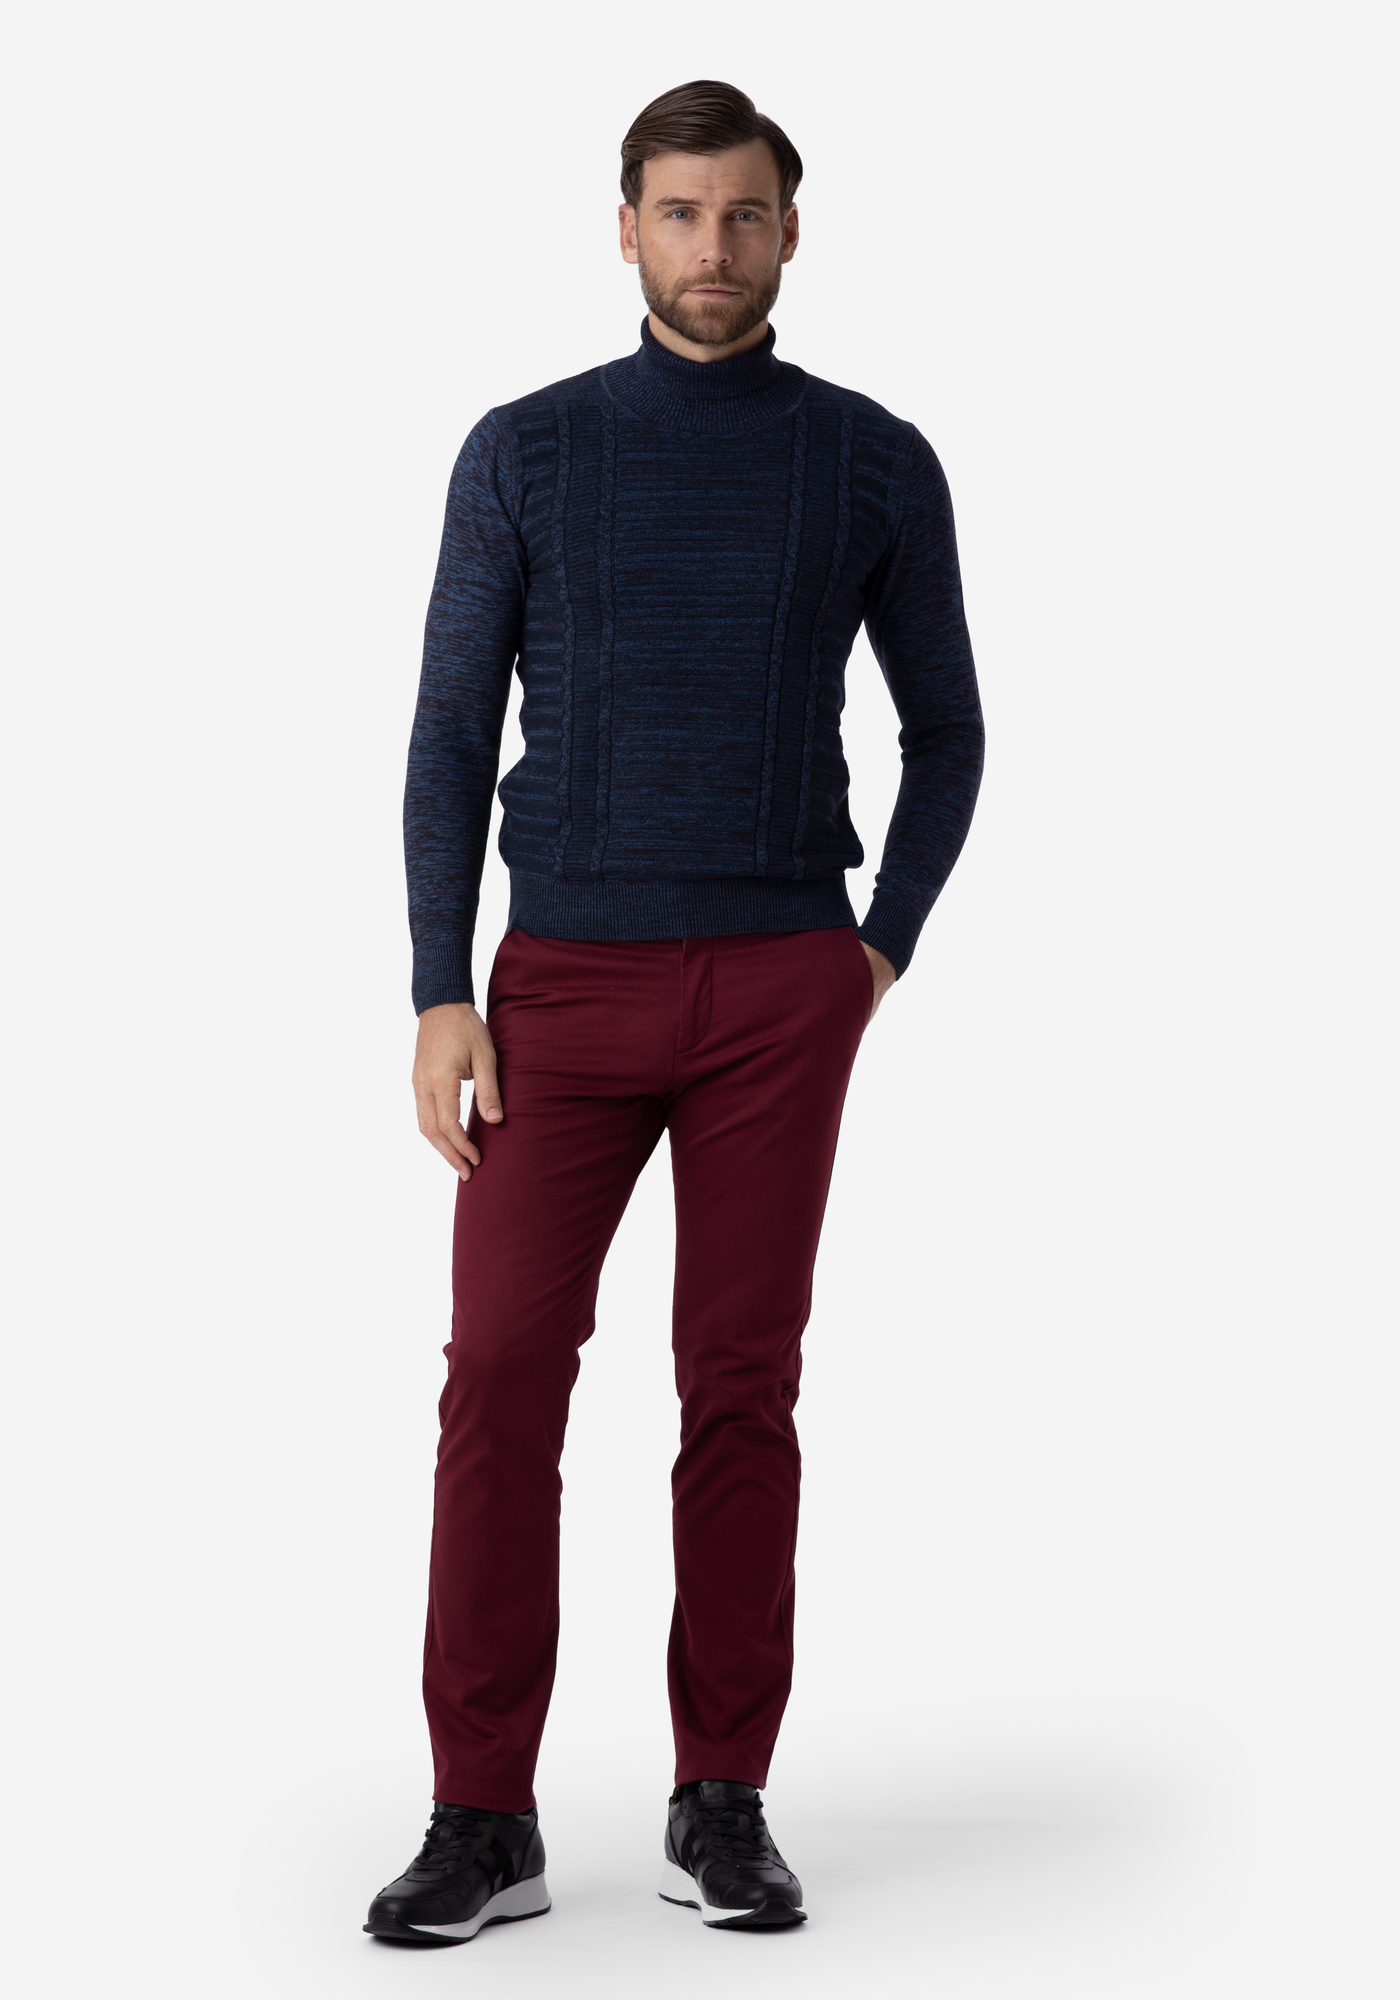 Catalina Blue Turtle Neck Pullover